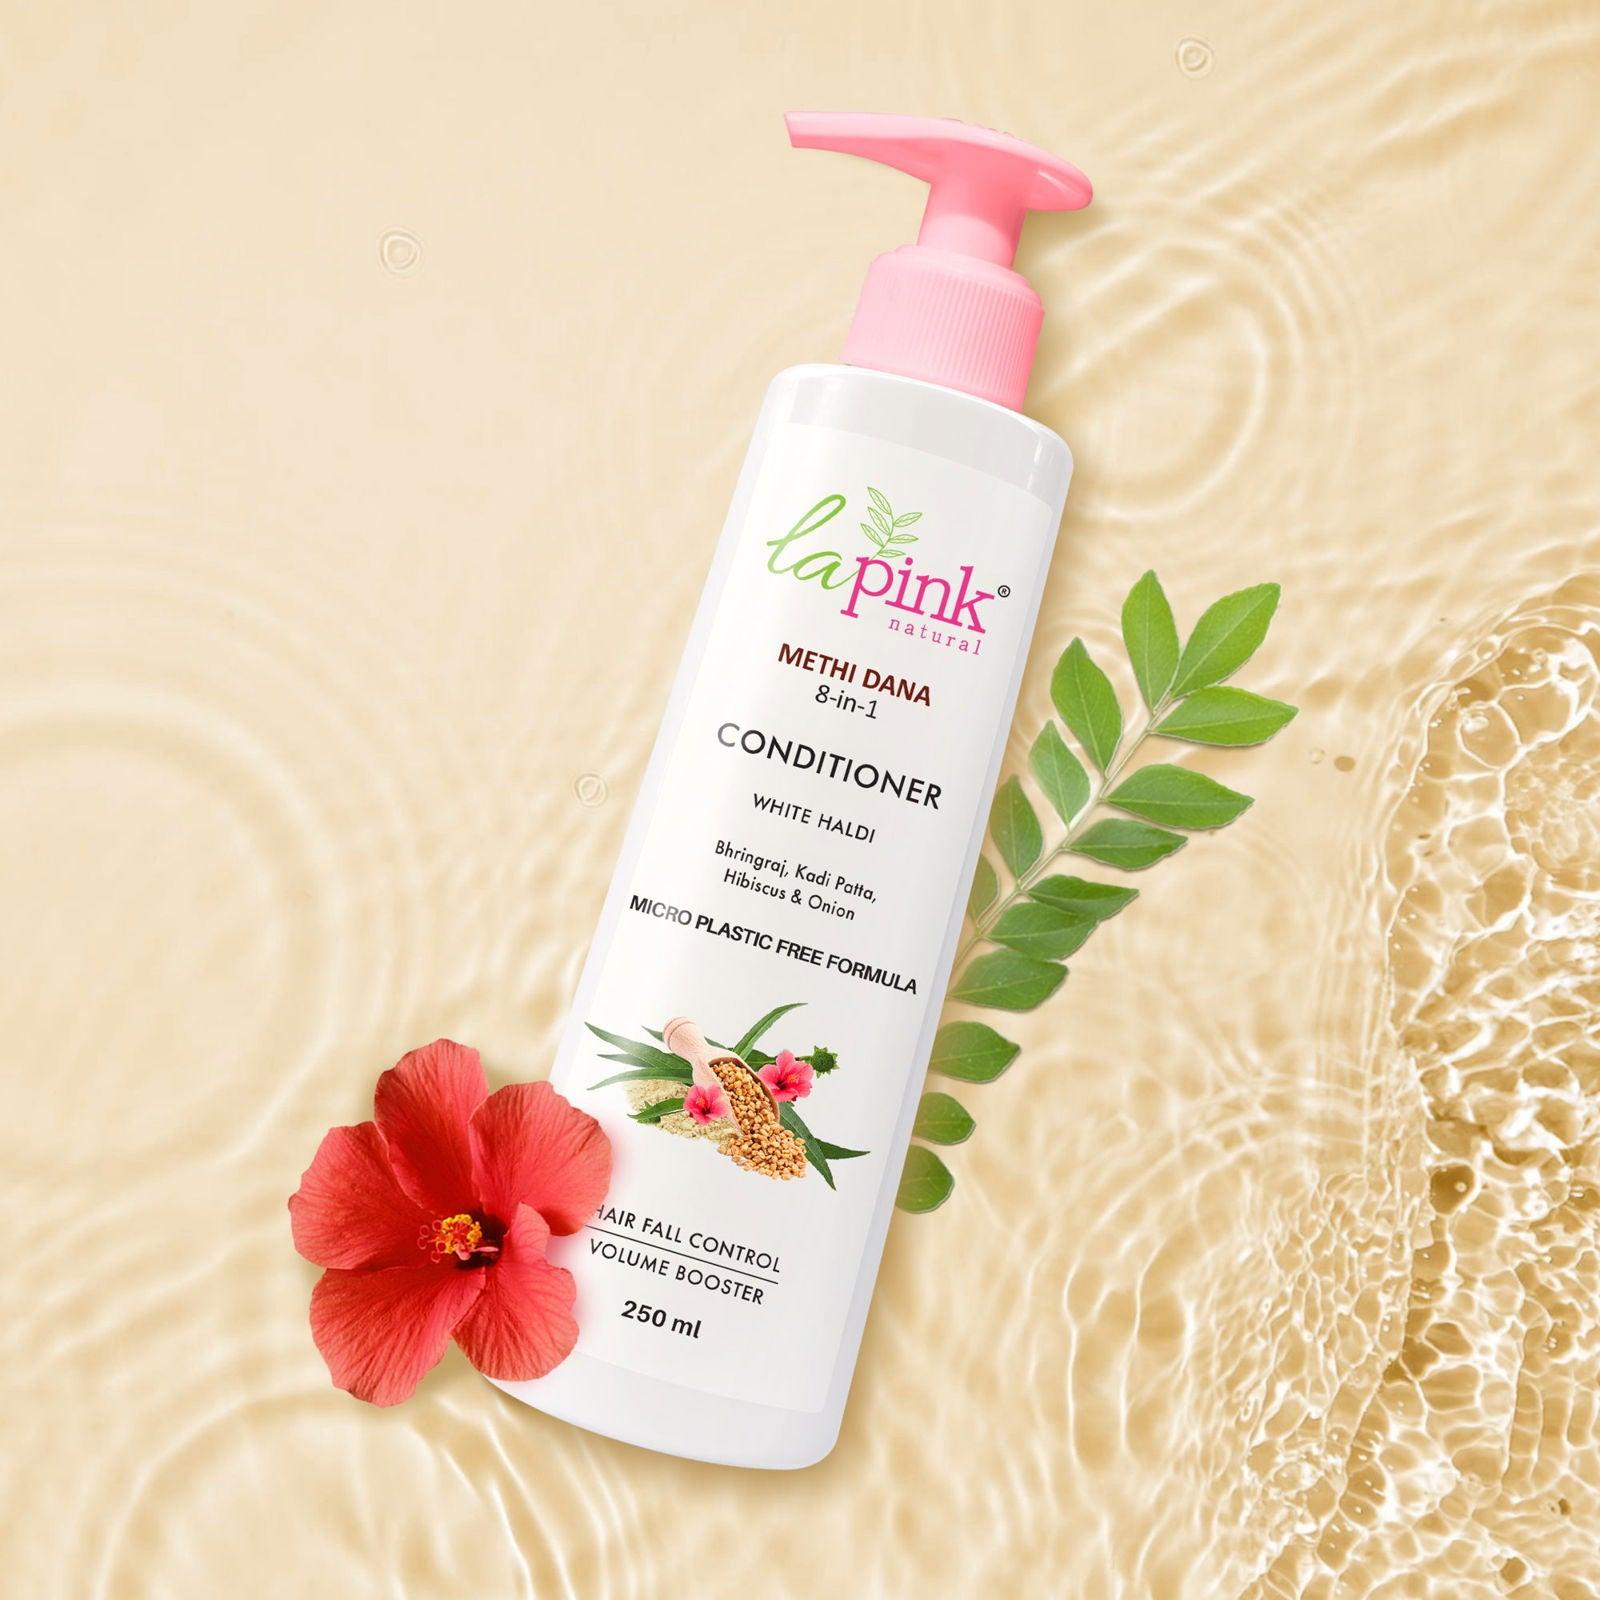 Methi Dana 8-in-1  Conditioner for Hair fall control - La Pink